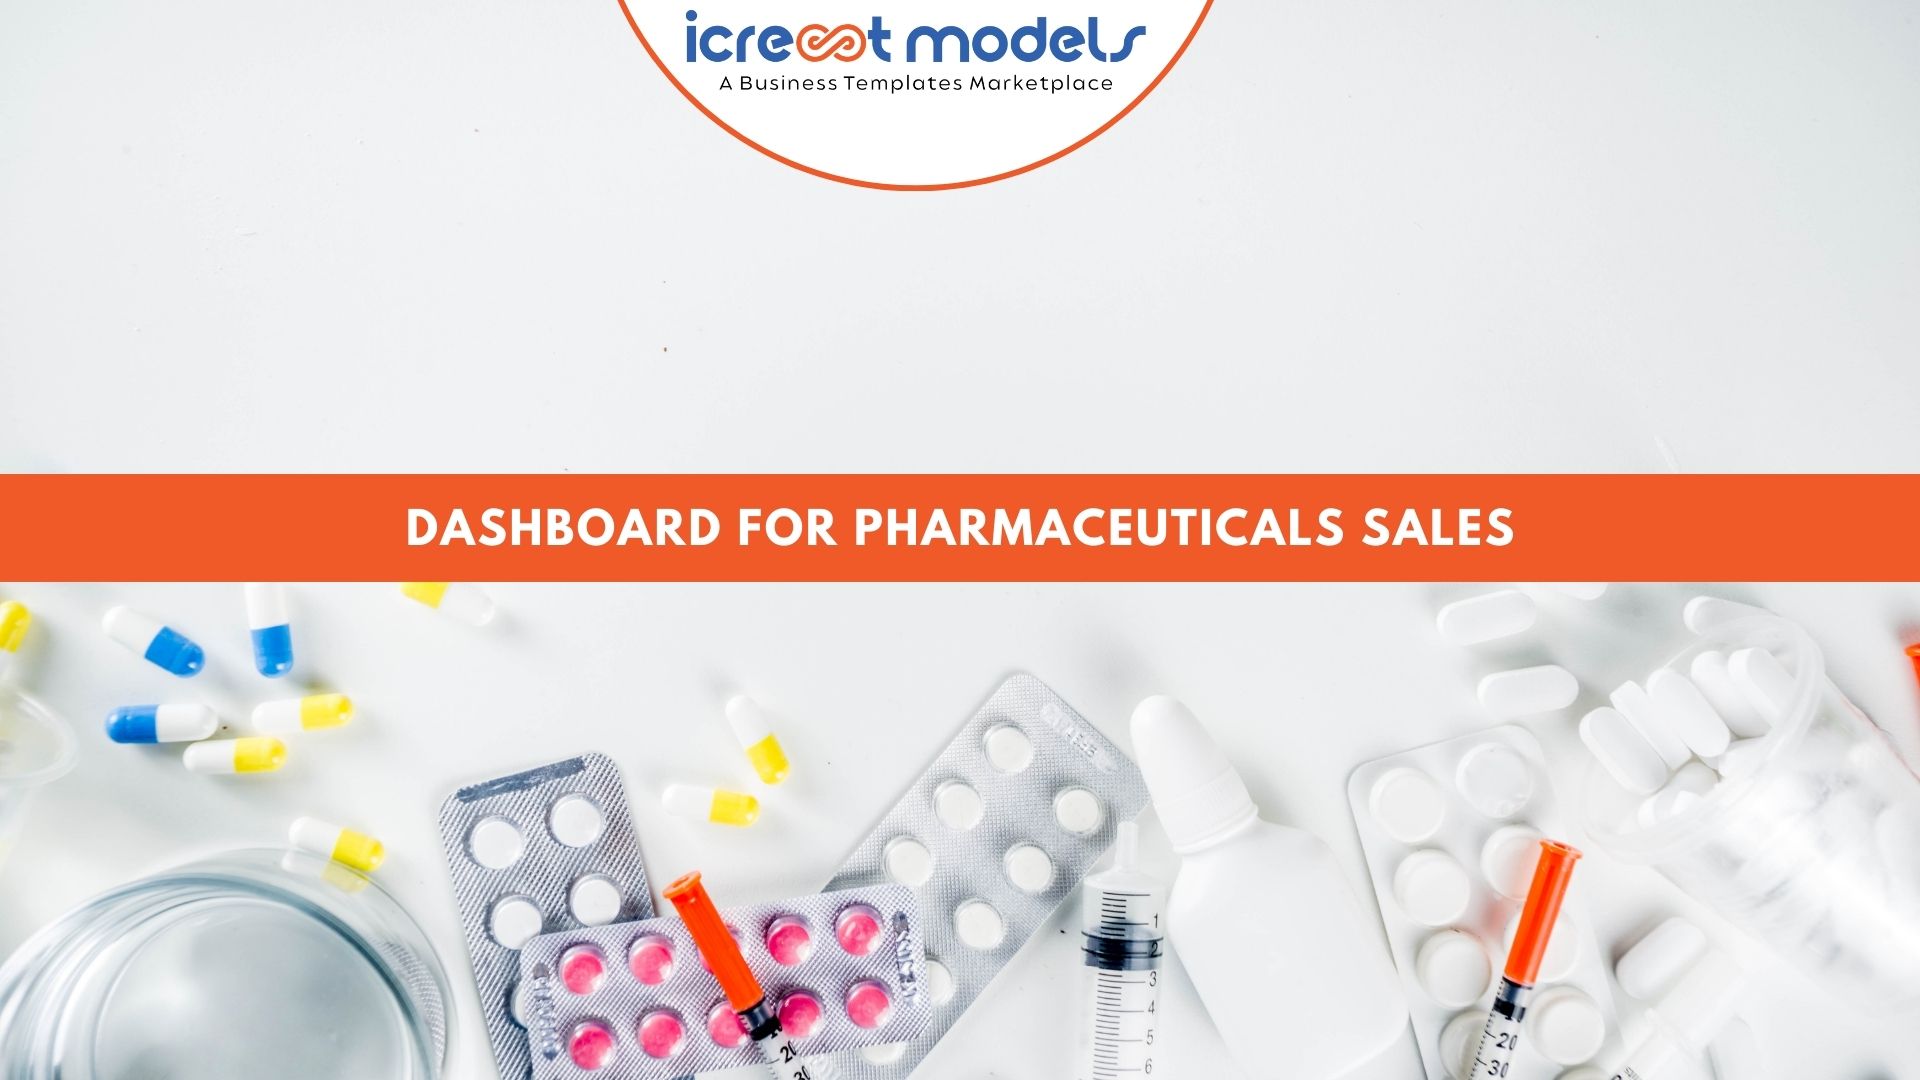 Dashboard For Pharmaceuticals Sales Performance